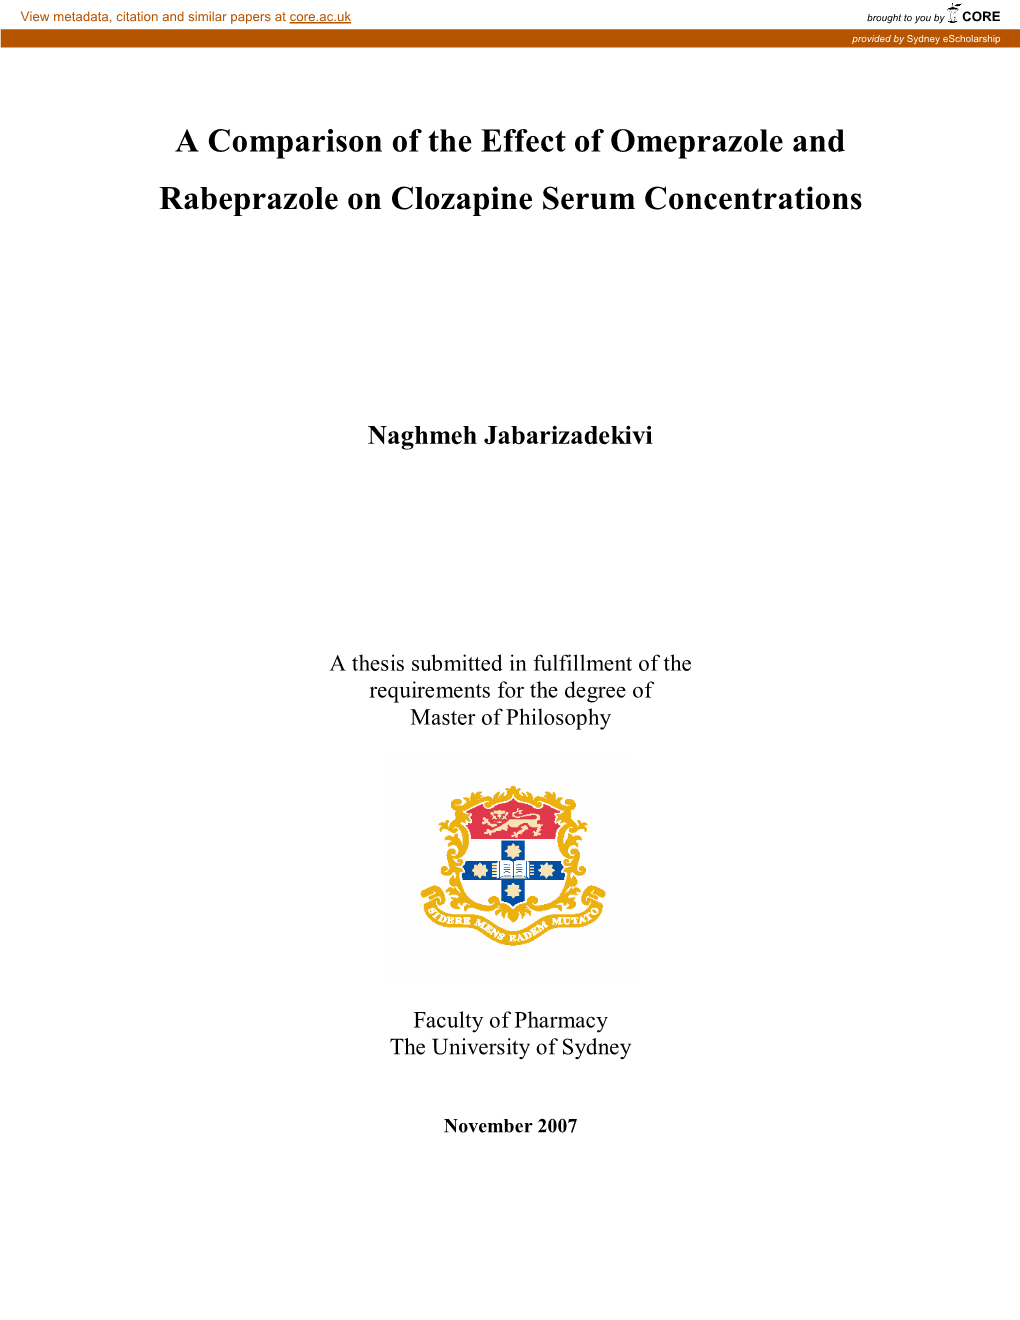 A Comparison of the Effect of Omeprazole and Rabeprazole on Clozapine Serum Concentrations